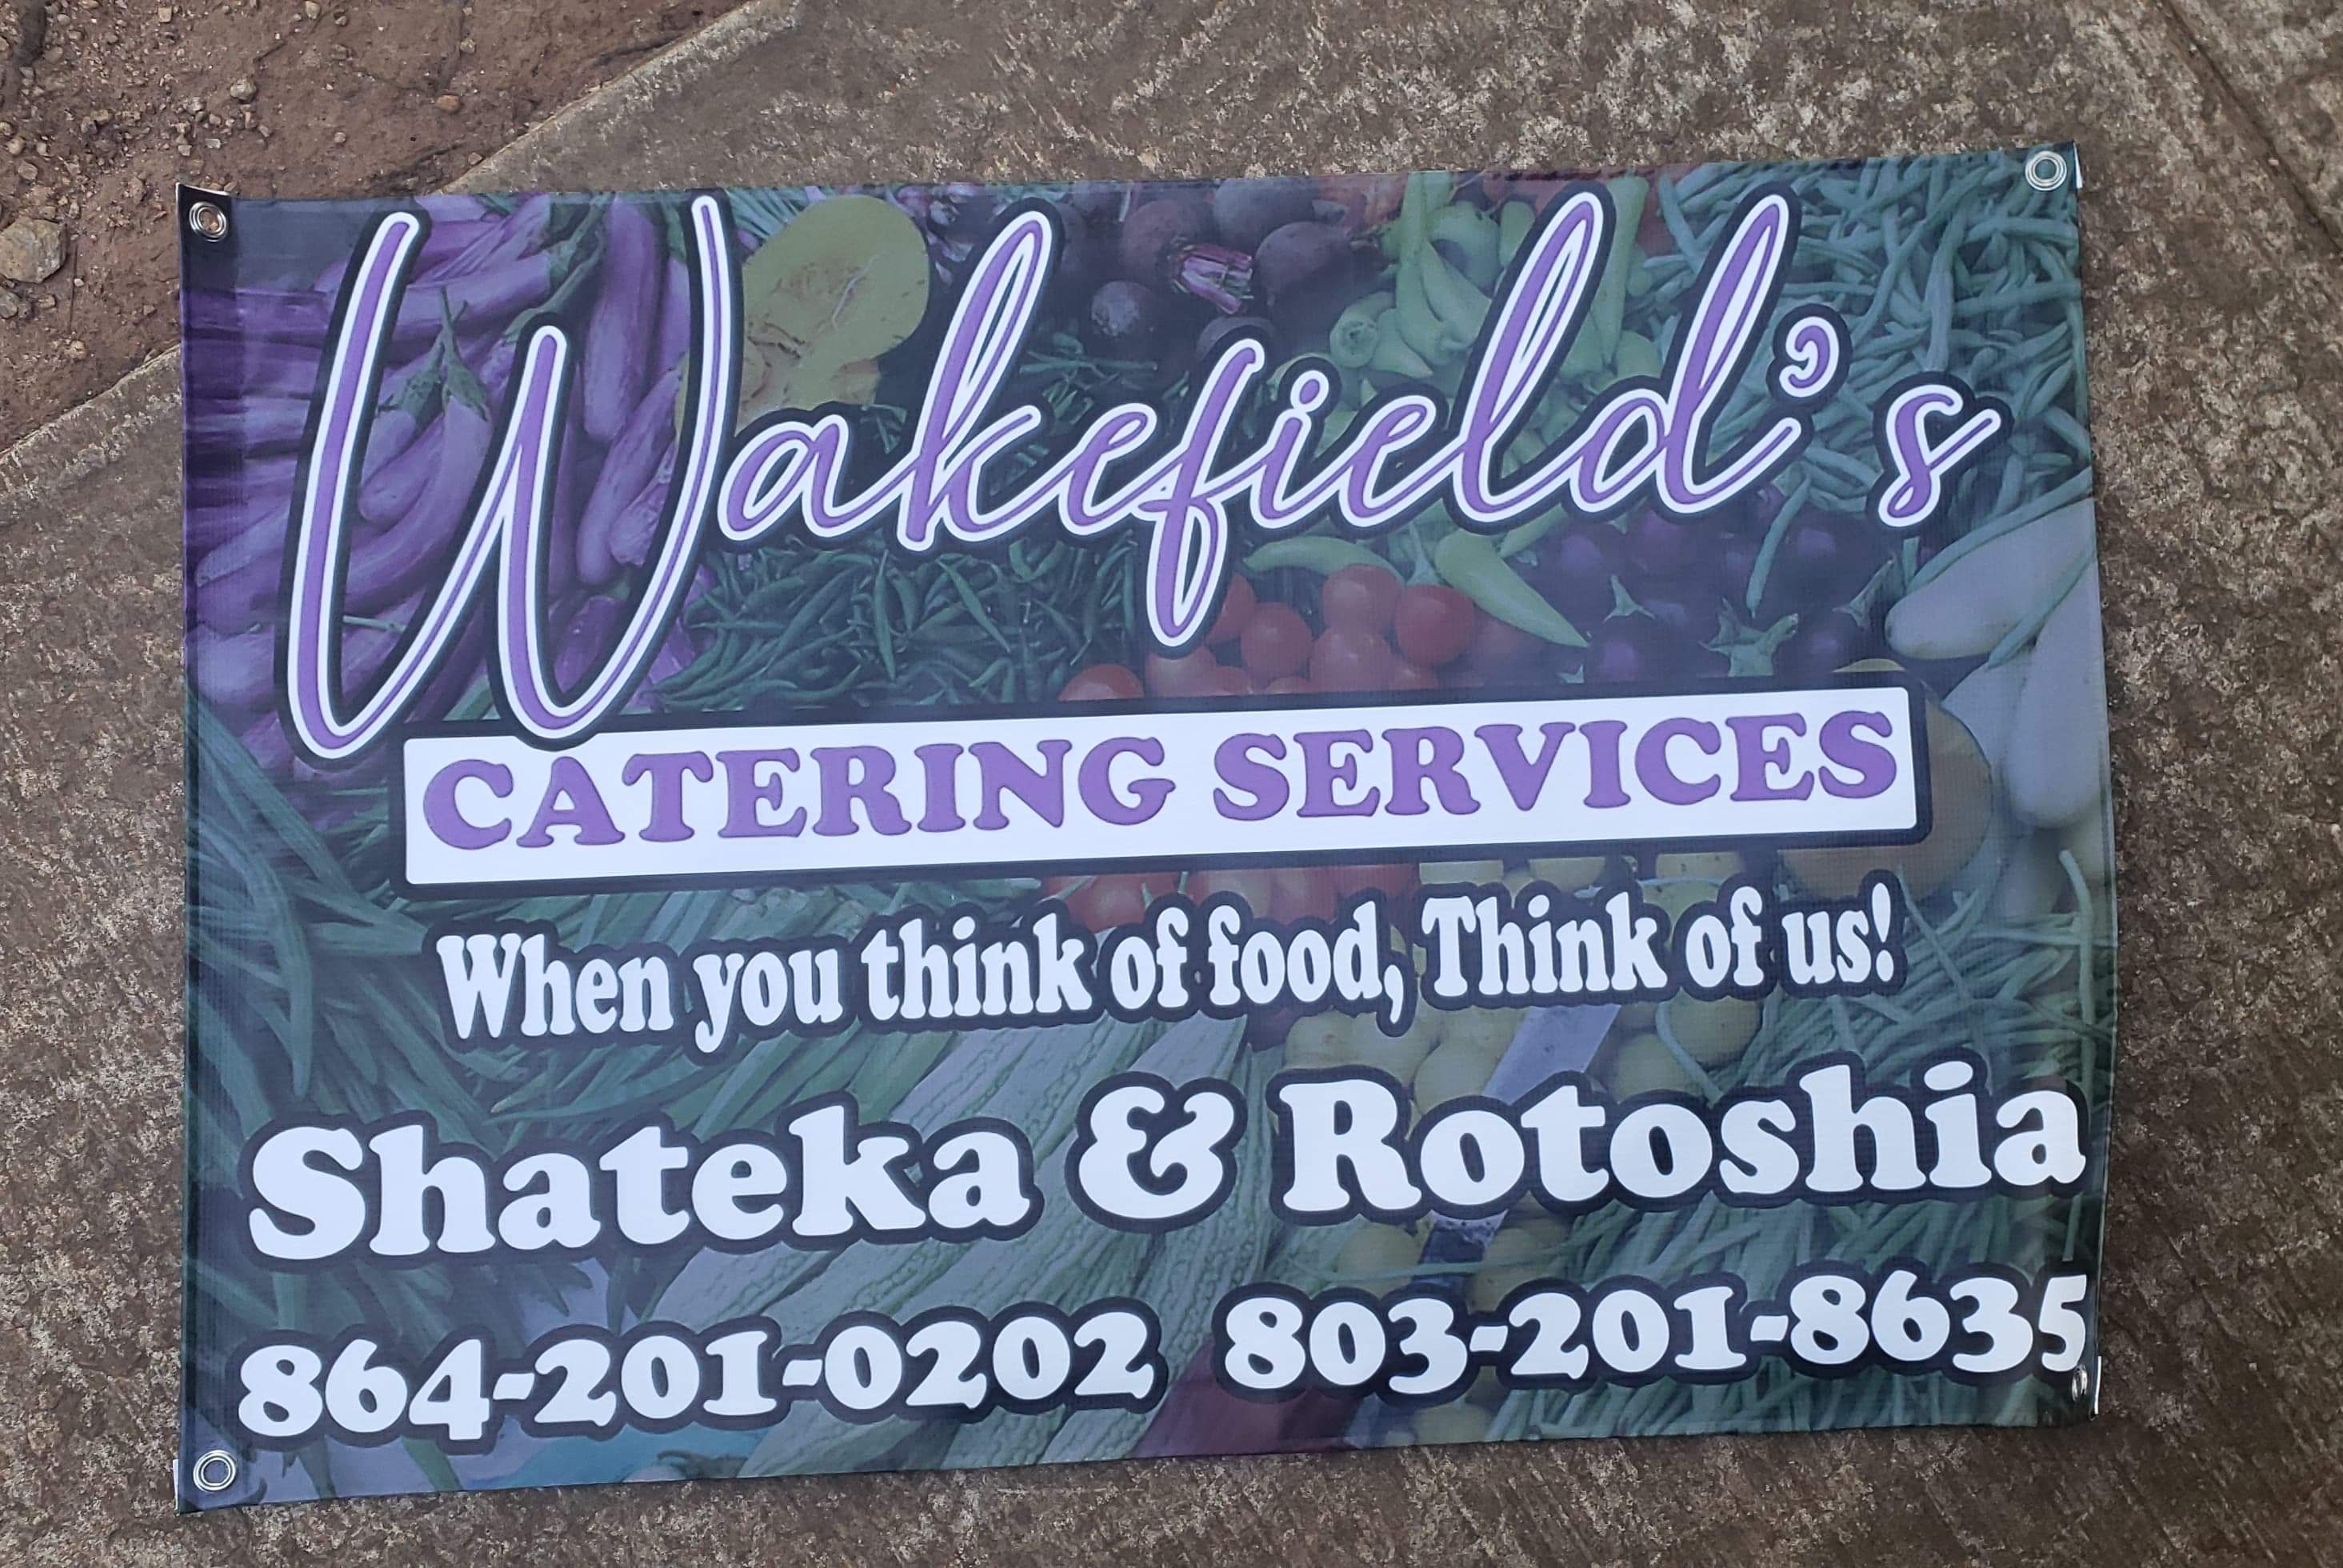 Wakefield's Catering Services